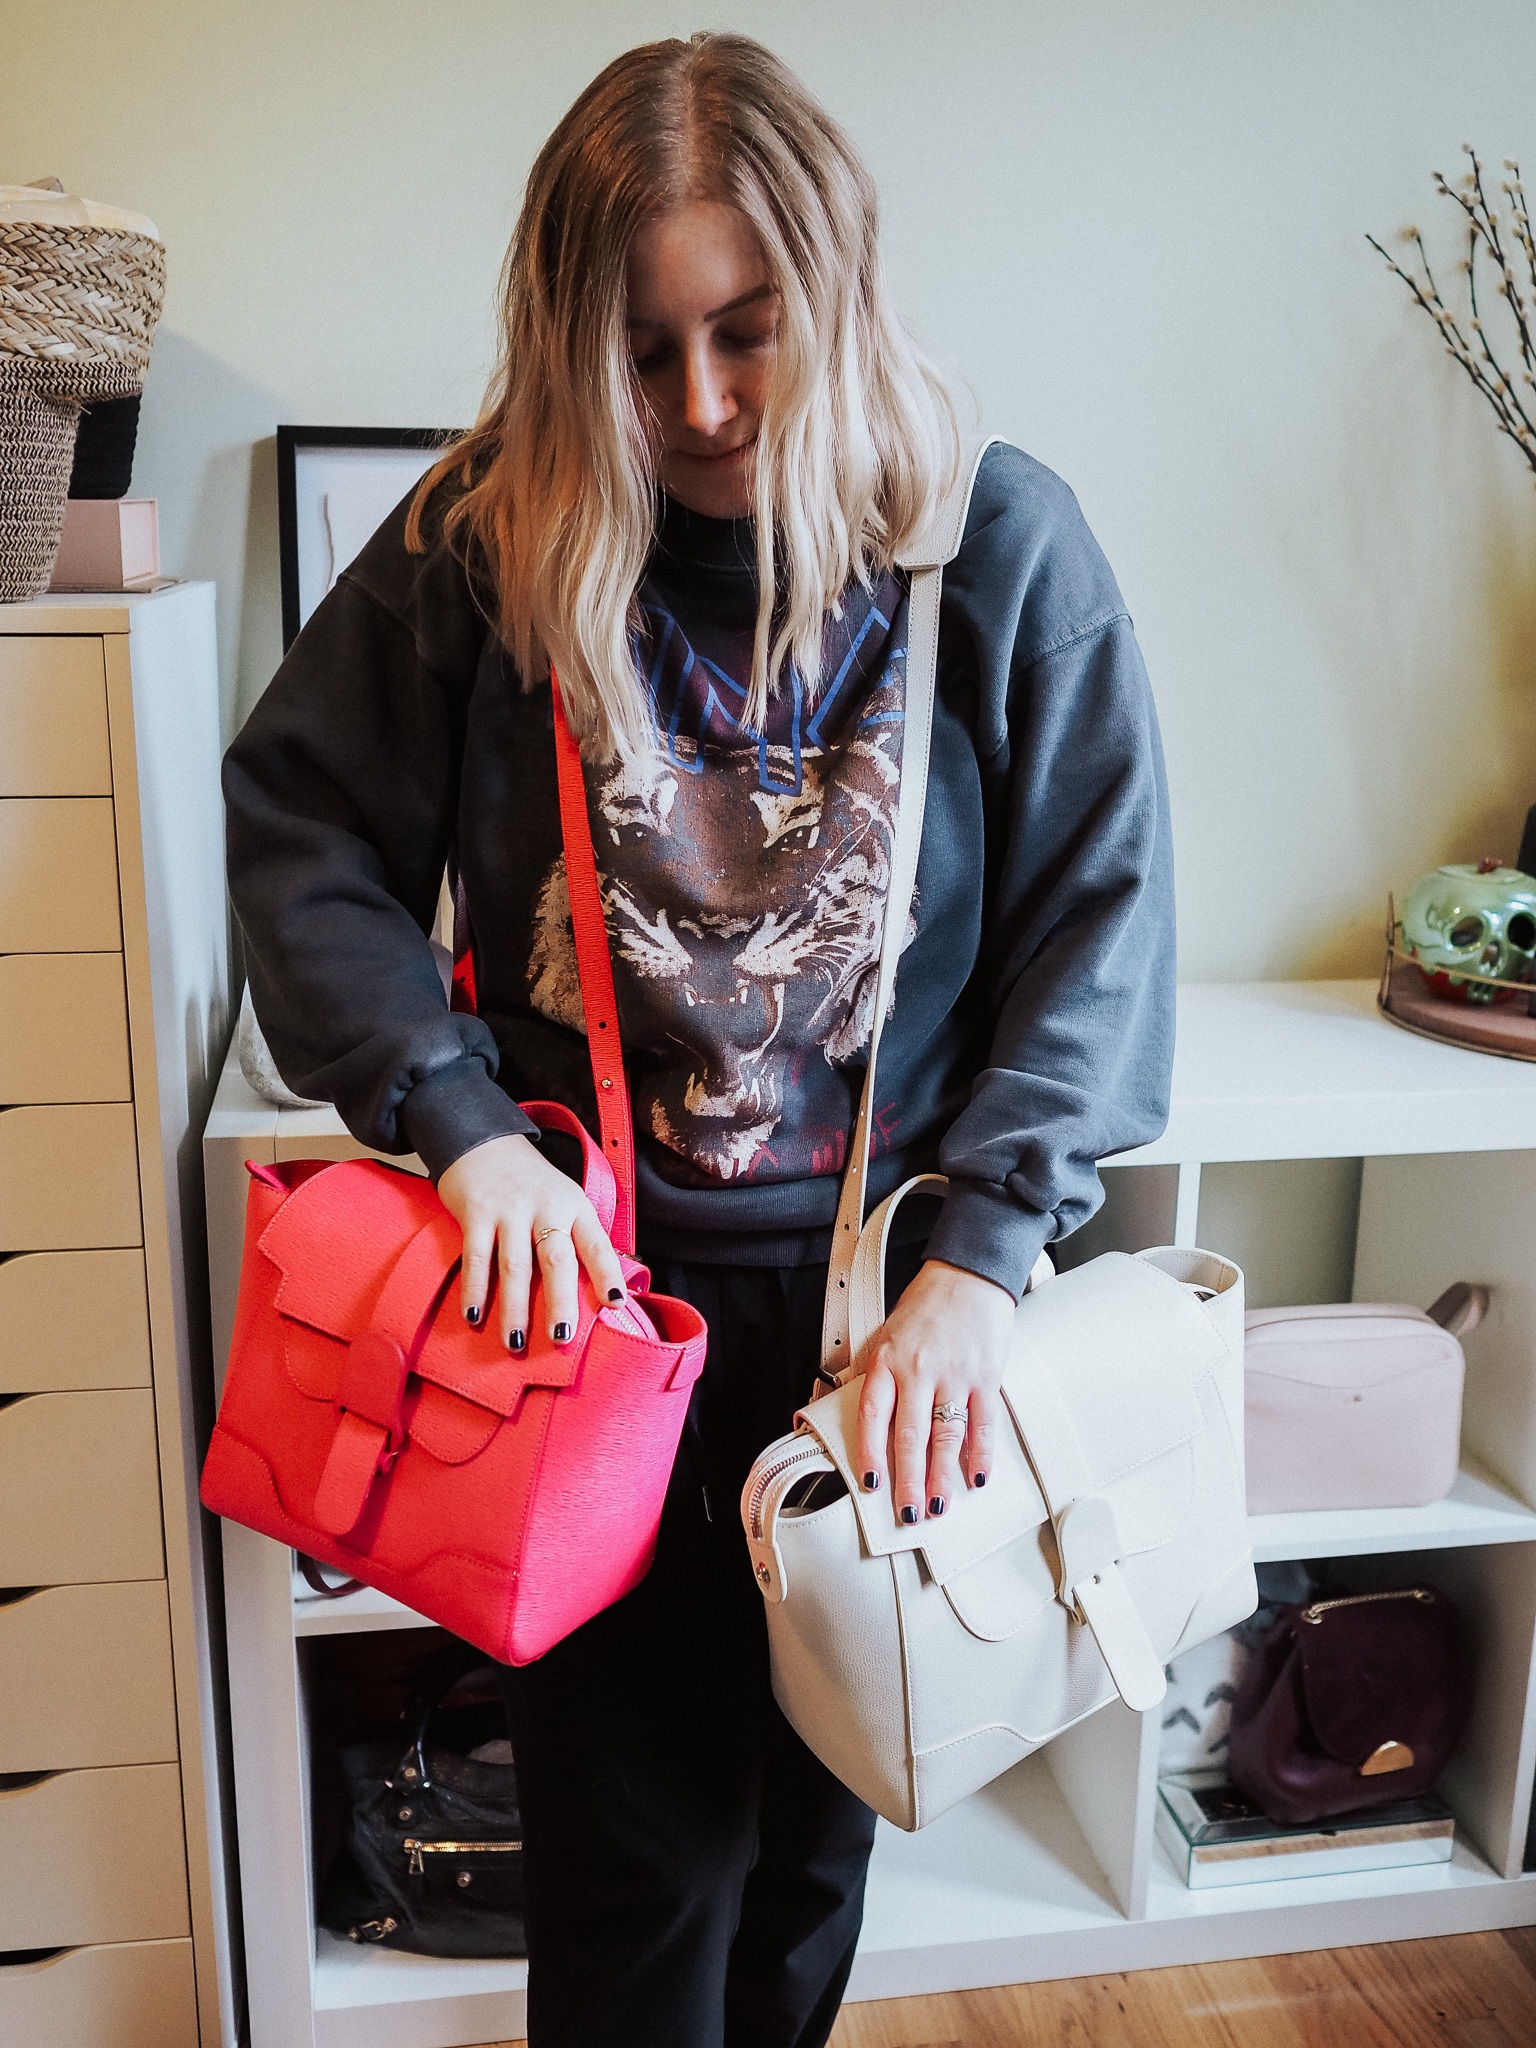 Find out if the Senreve Maestra bag is worth the price in this thorough Senreve review by Kelsey of Blondes and Bagels!